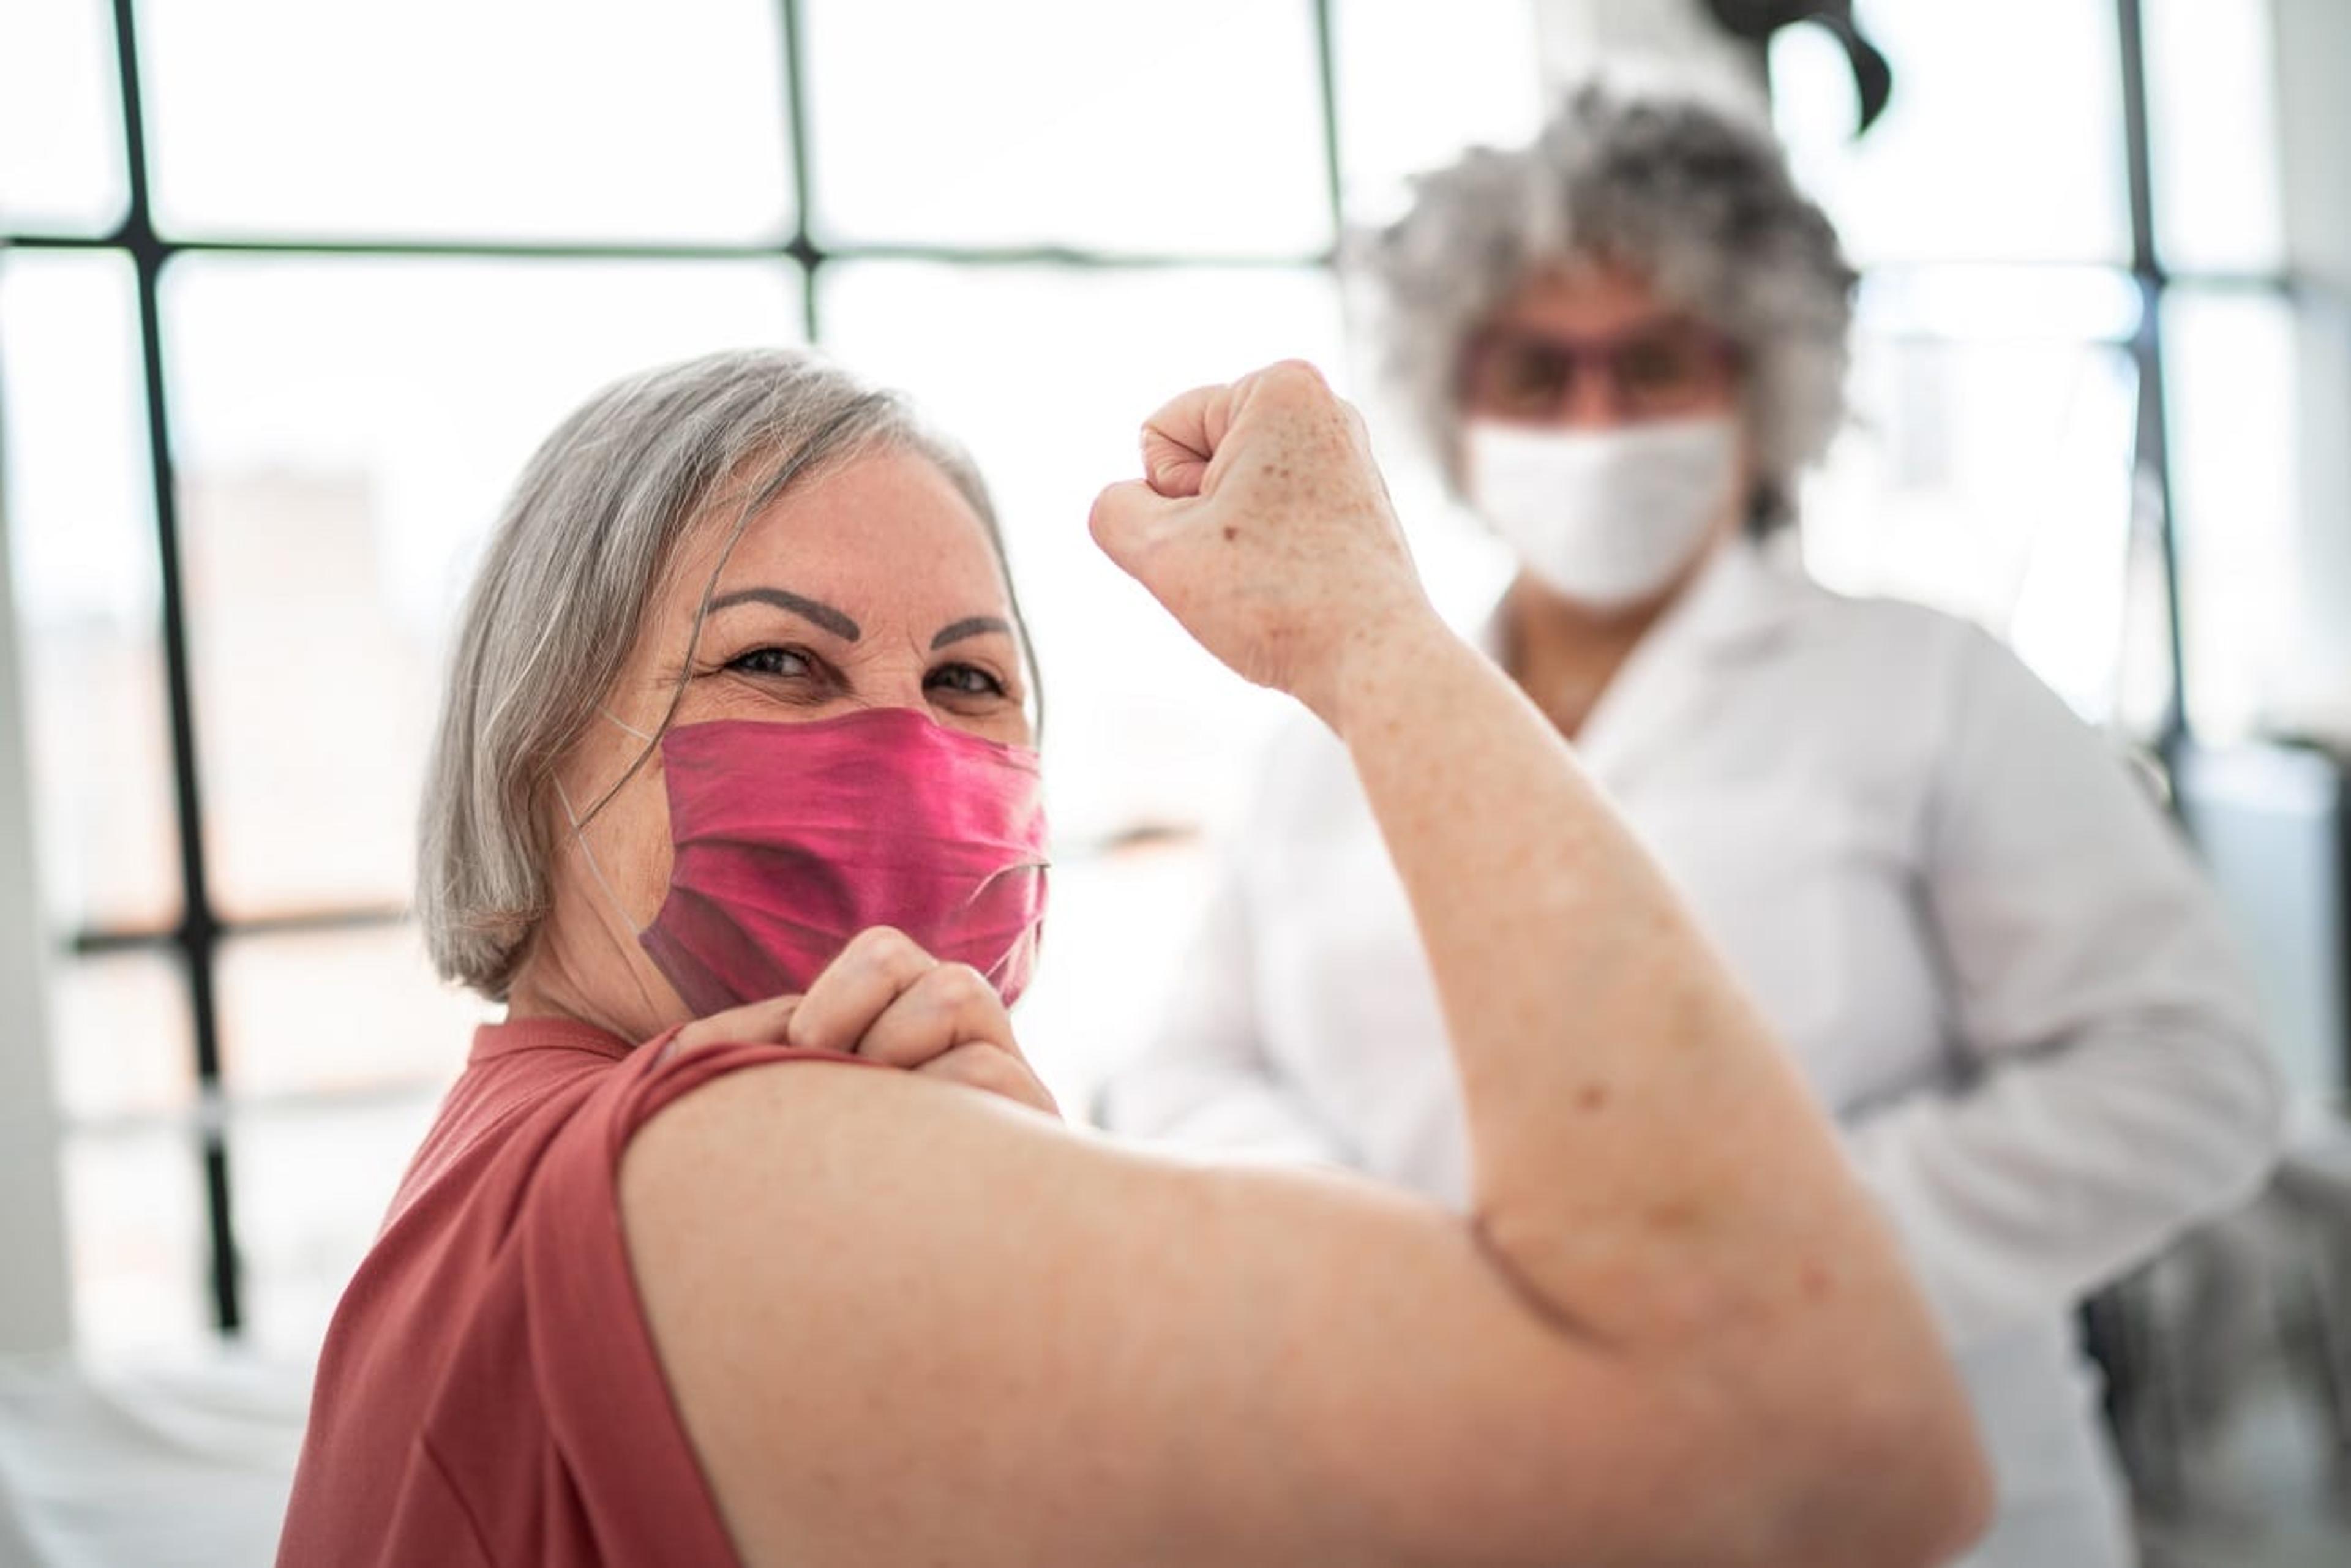 Woman wearing a mask curls her arm in a pose after being vaccinated